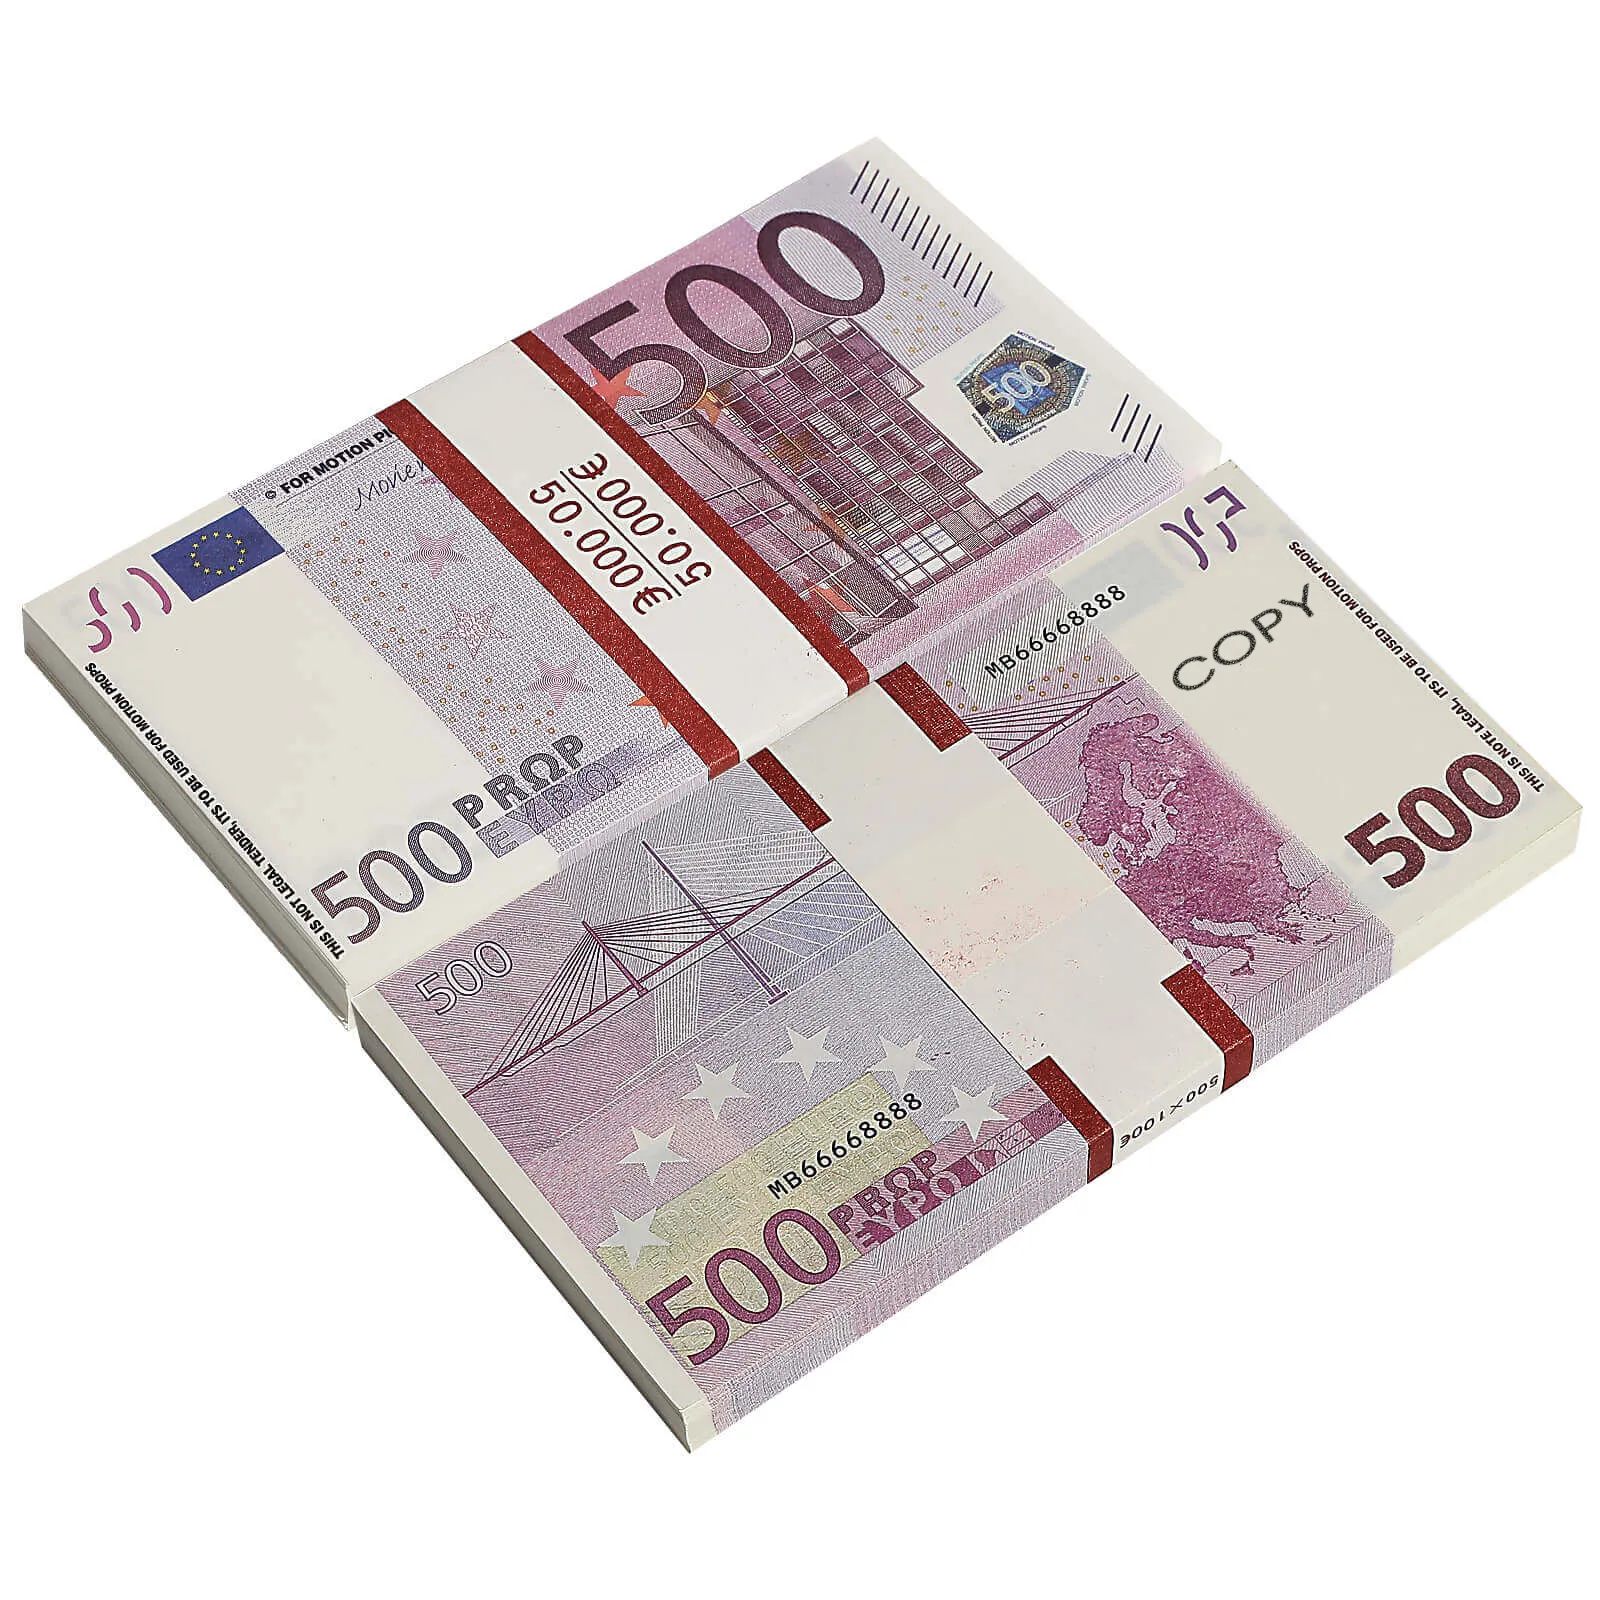 Papier-monnaie 500 Euro Toy Dollar Bills Réaliste Full Print 2 Sides Play Bill Kids Party and Movie Props Fake Euro Pranks for Adults